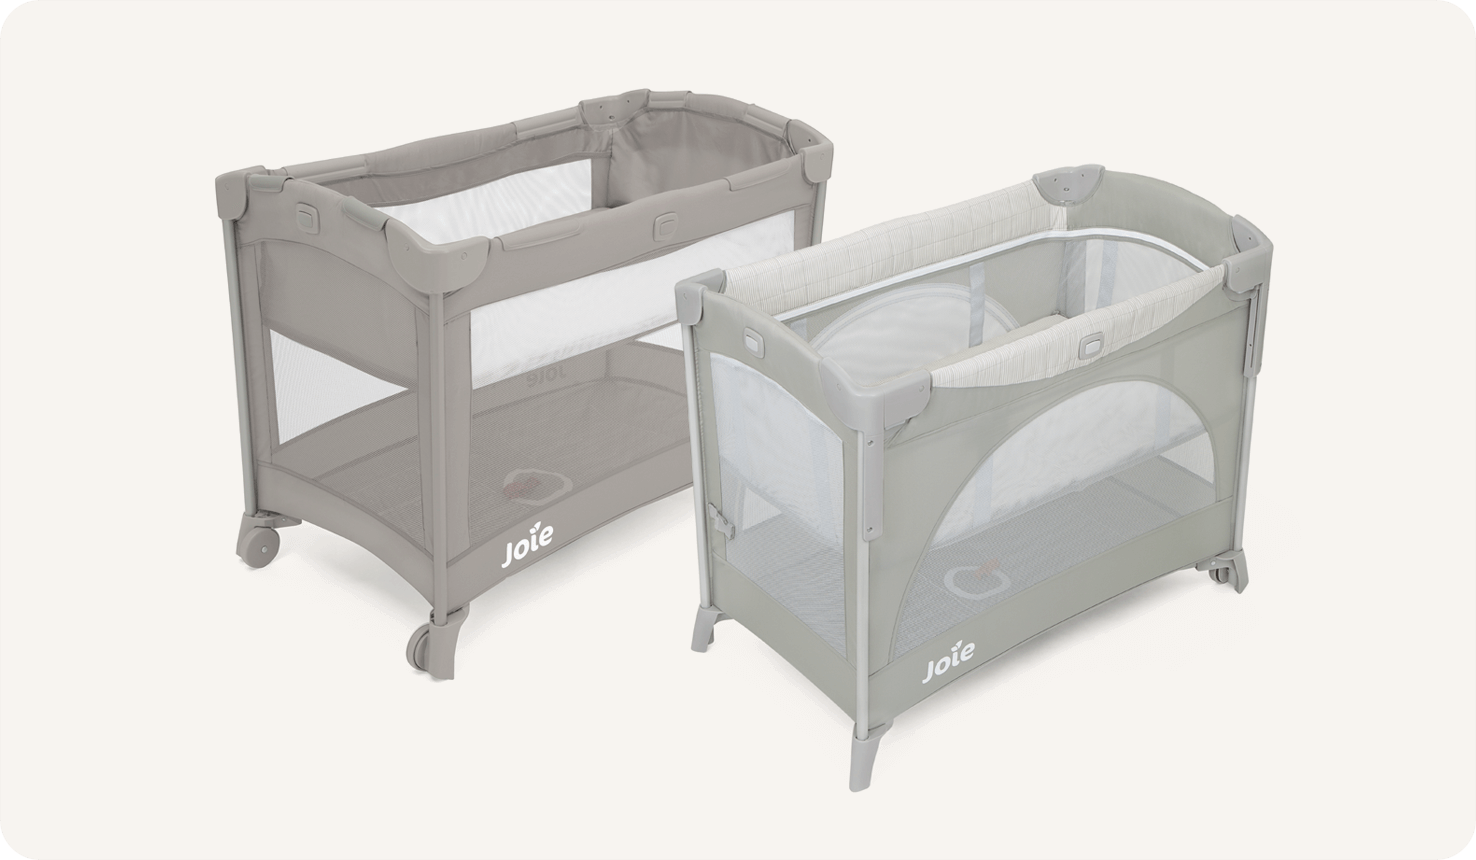  Two travel cots sitting side by side: The Joie Kubbie and Kubbie Sleep